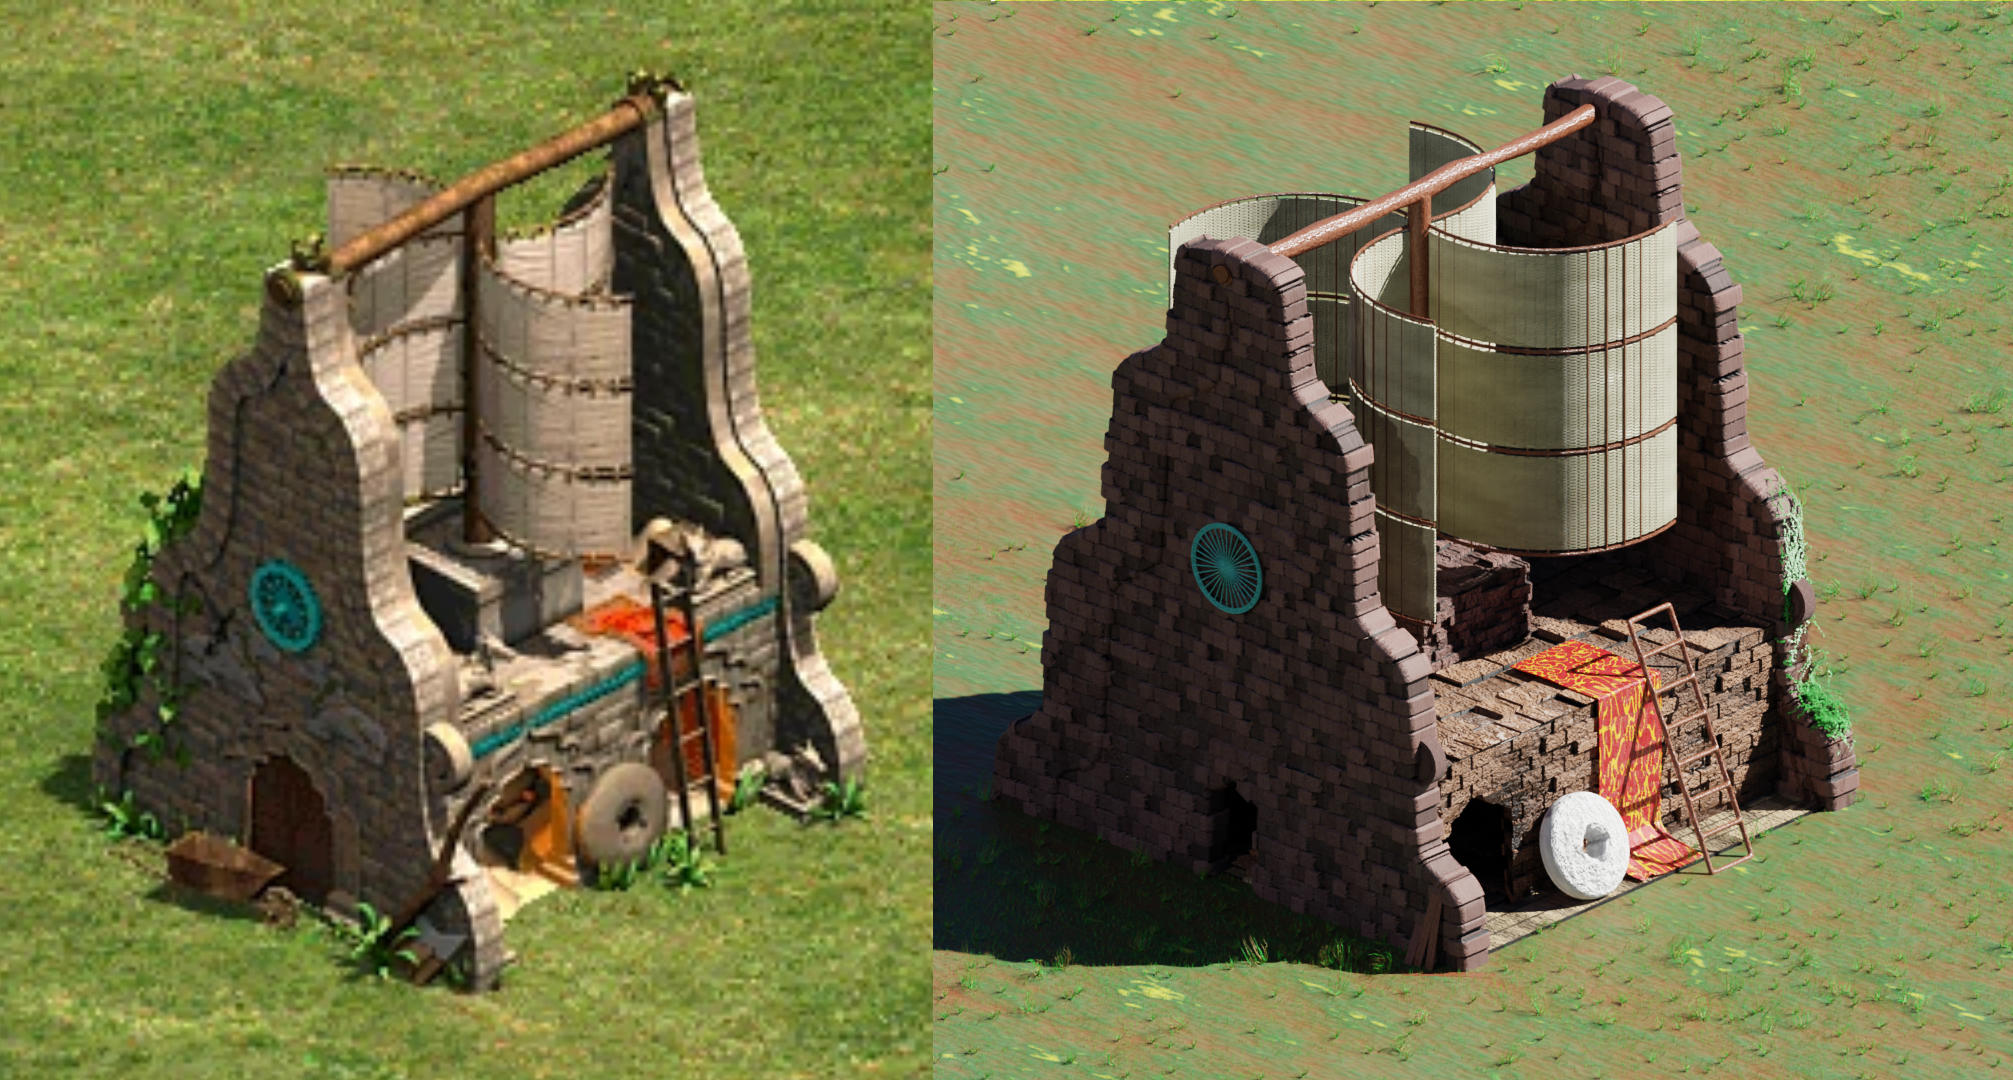 Comparison to reference, Age of Empires Mill